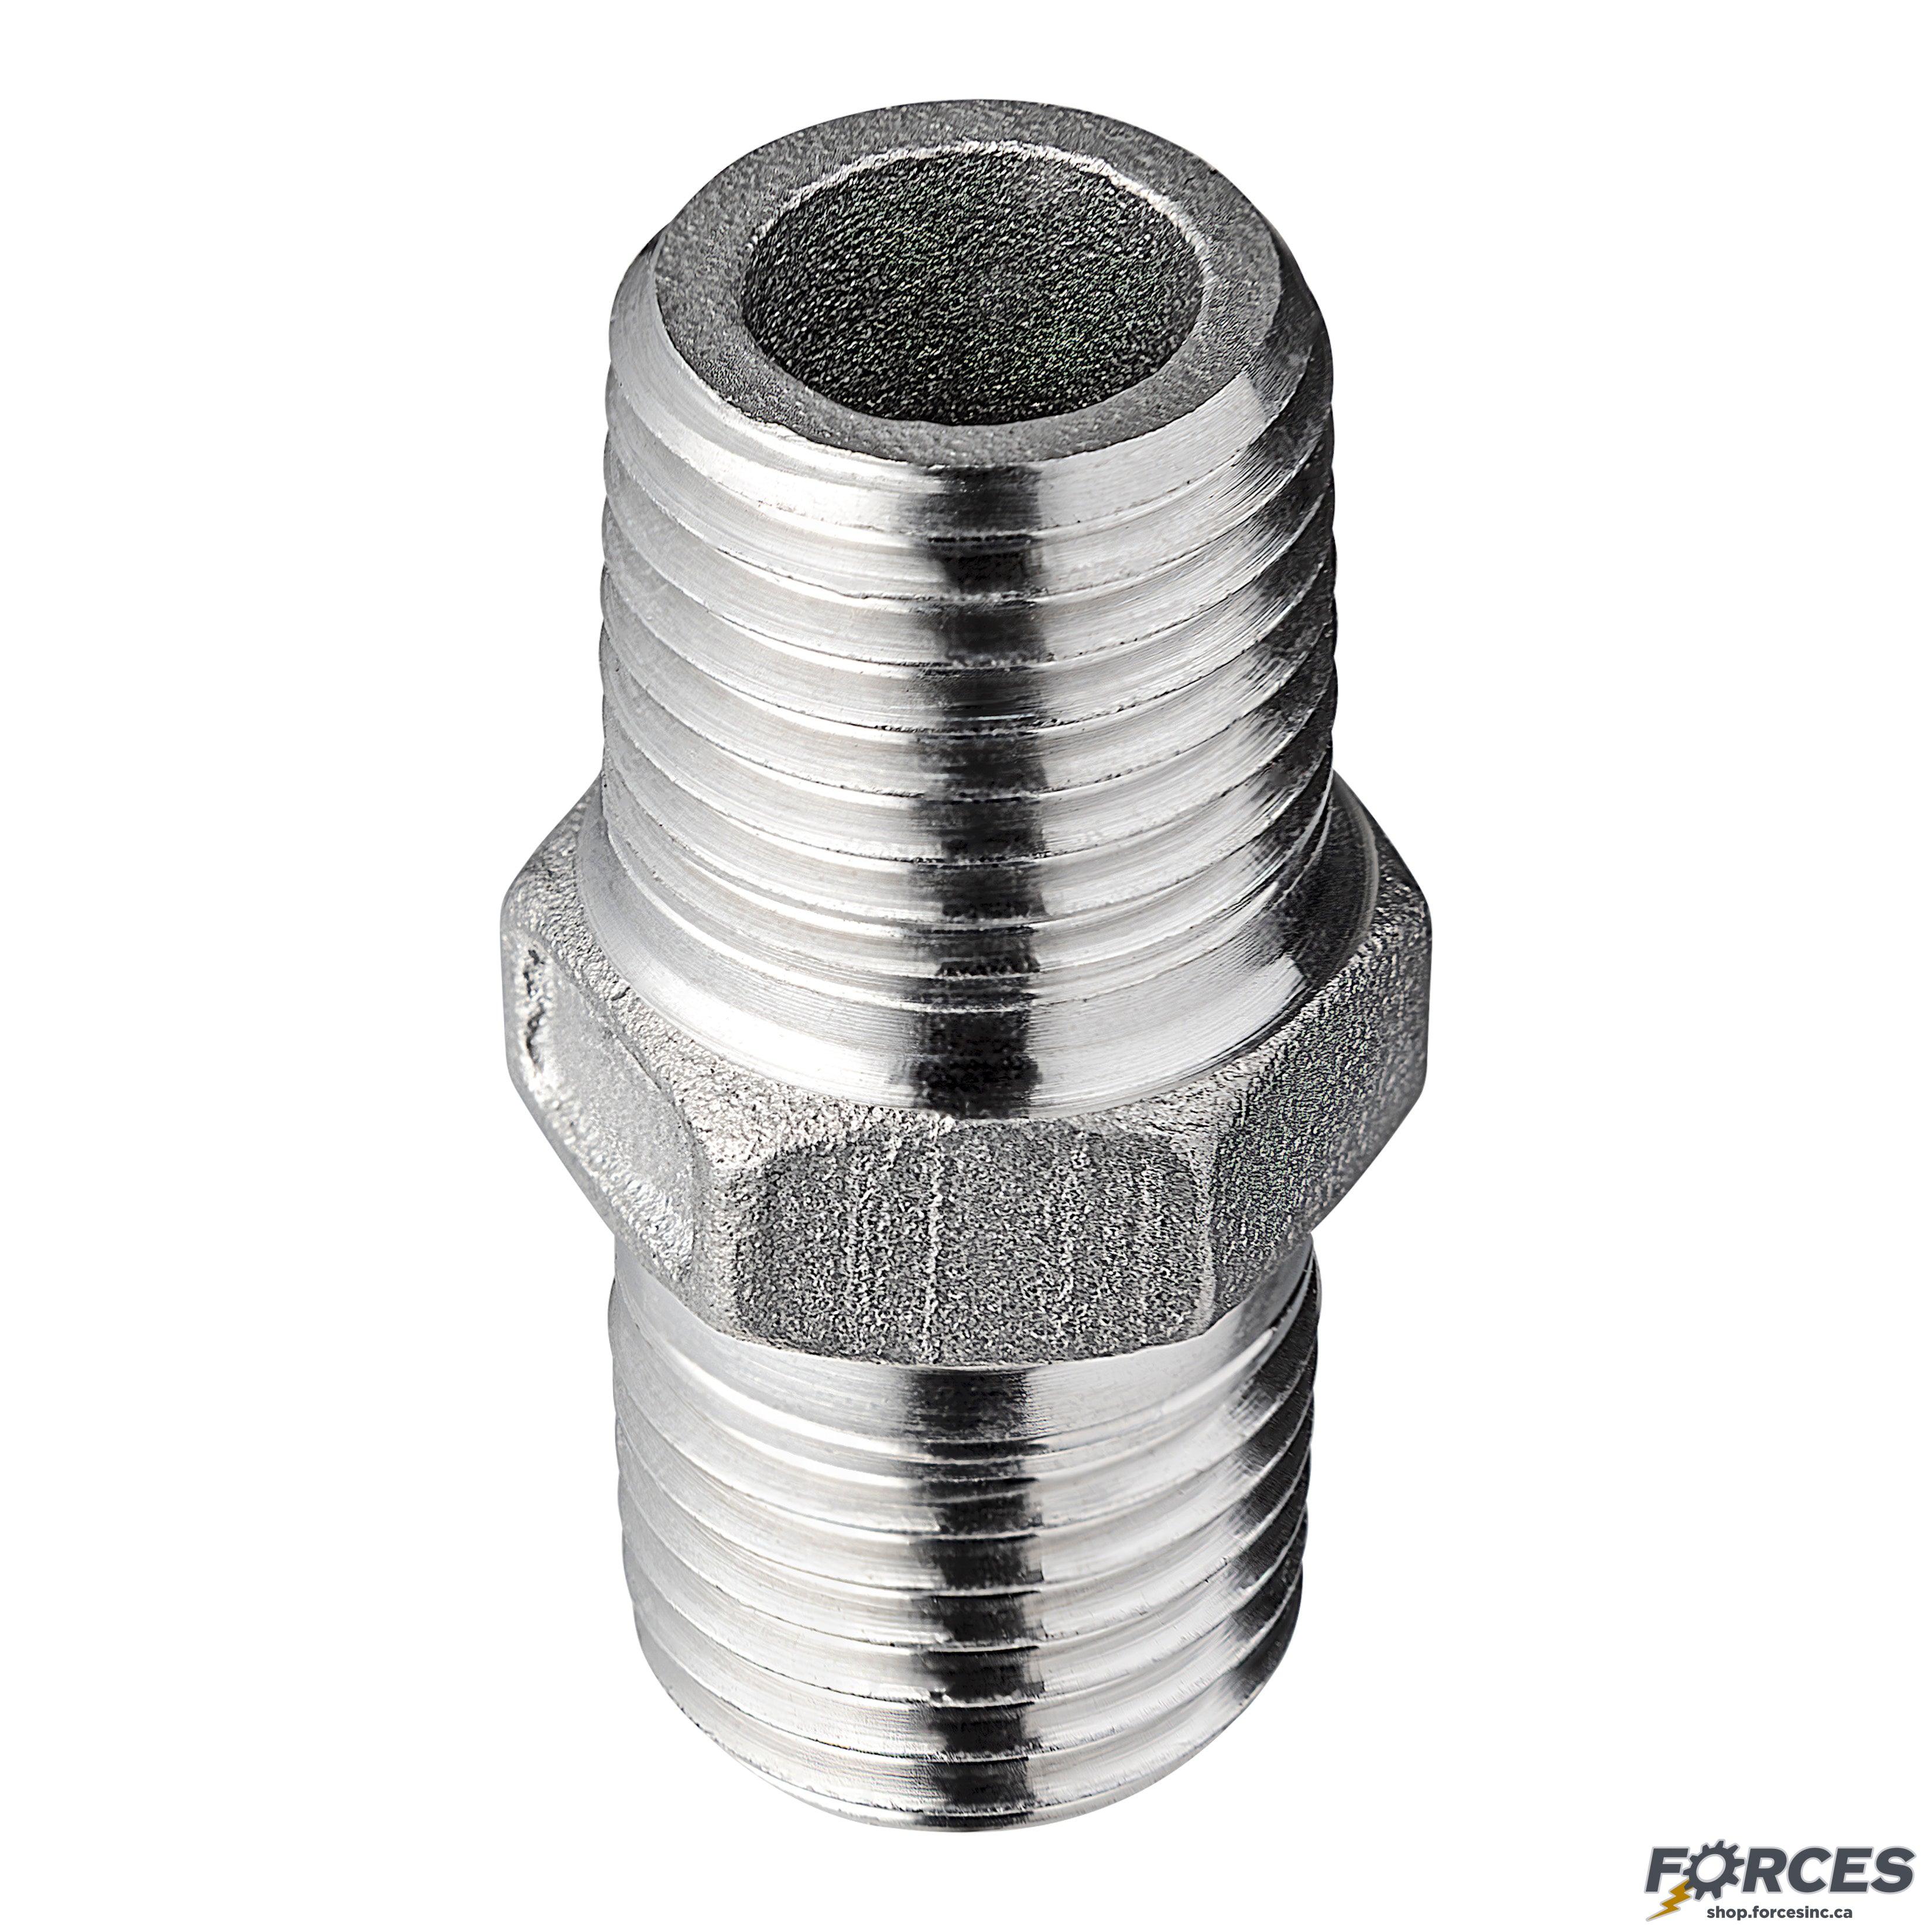 1-1/2" Hex Nipple NPT #150 - Stainless Steel 316 - Forces Inc